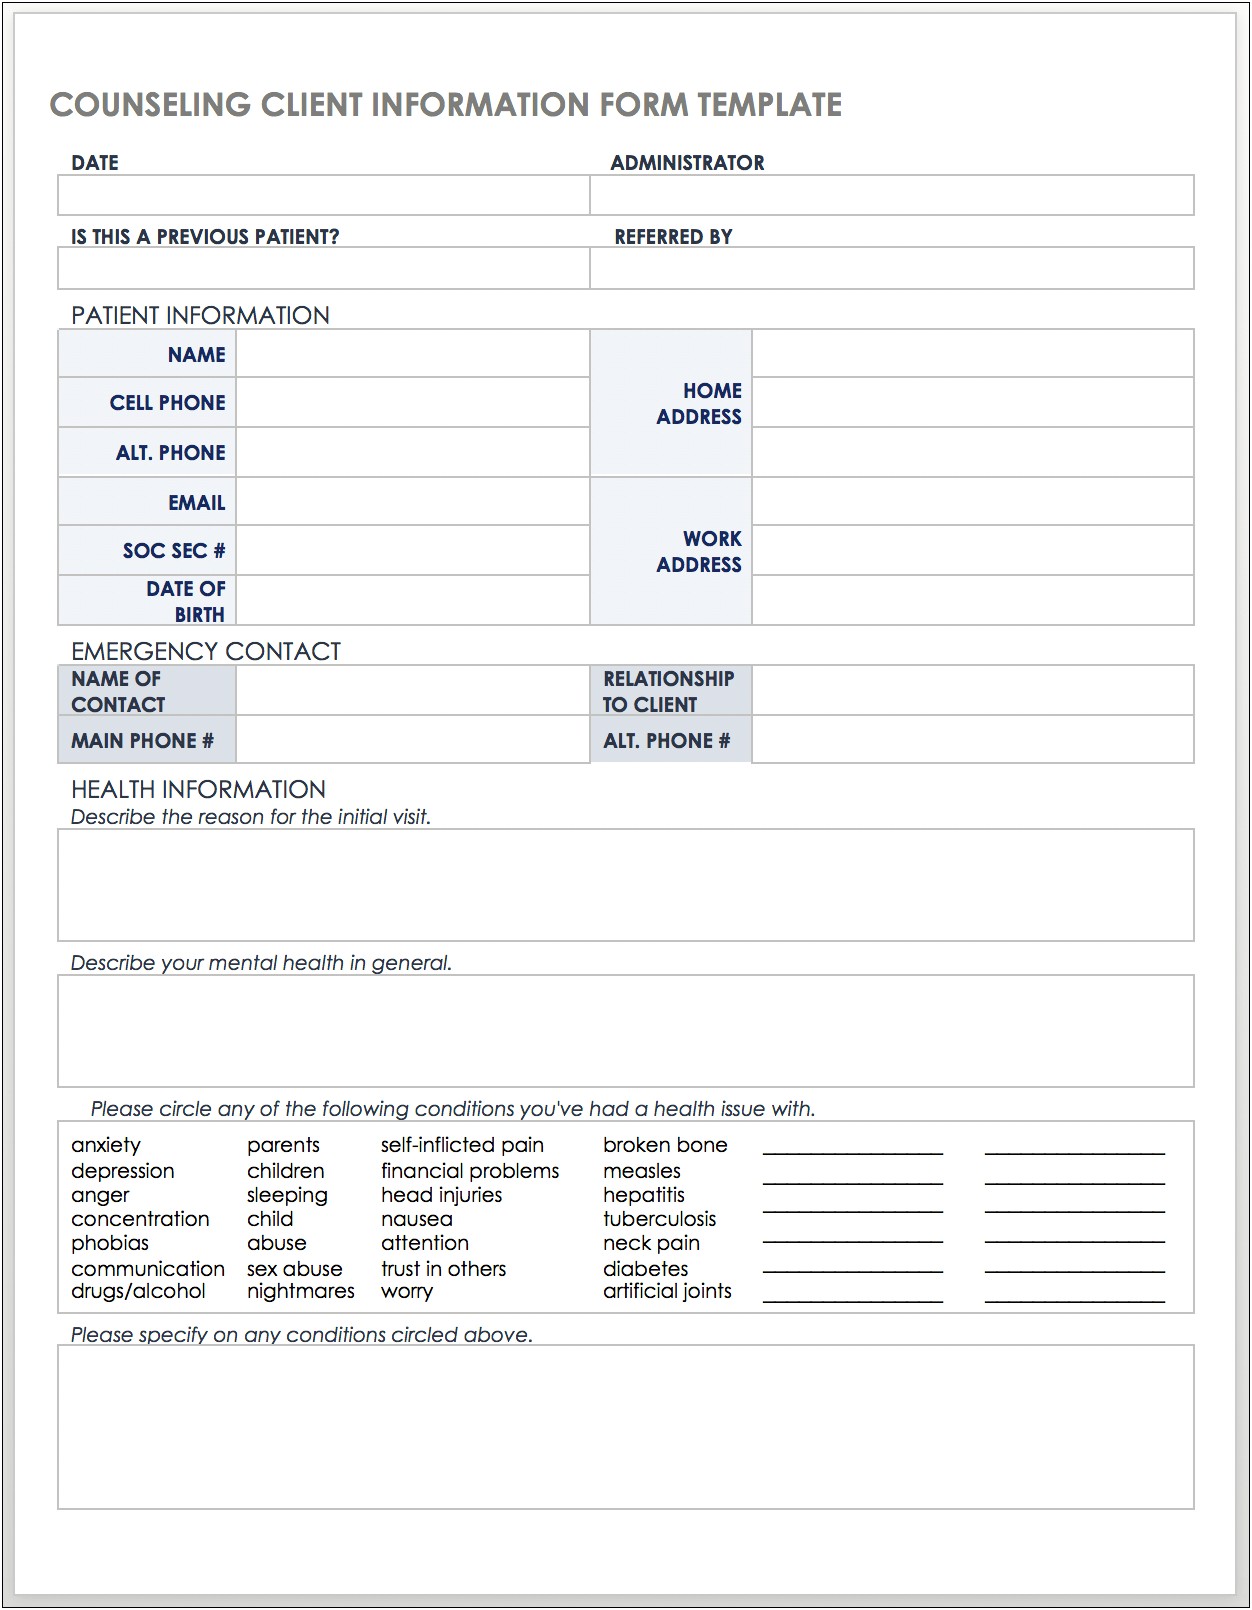 Basic Information Form Template Microsoft Word